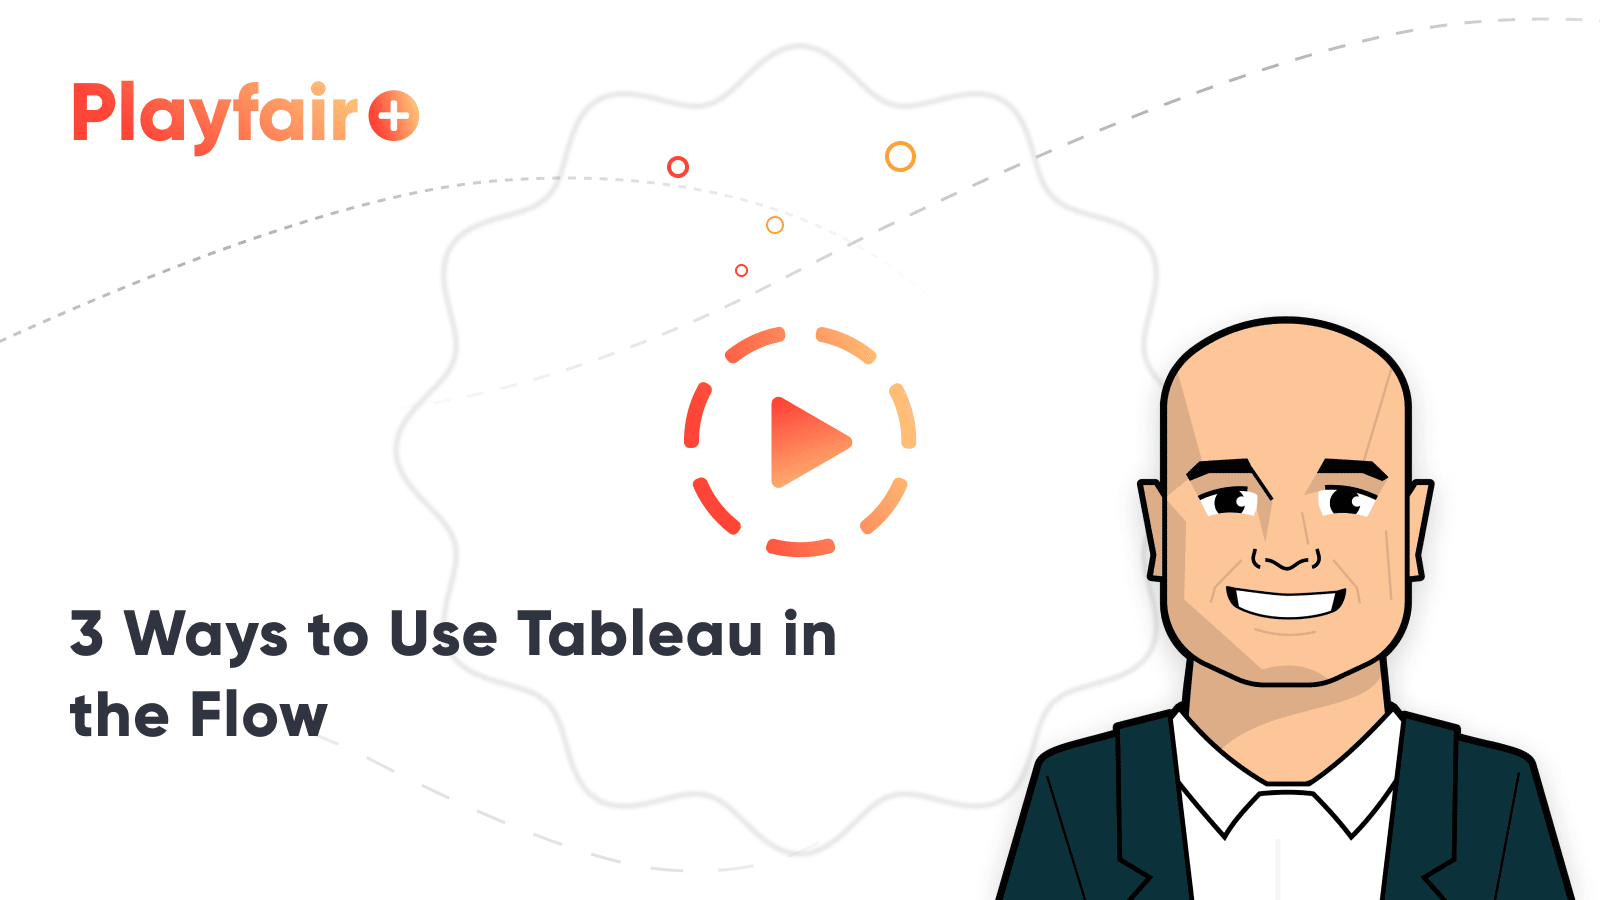 3 Ways to Use Tableau in the Flow